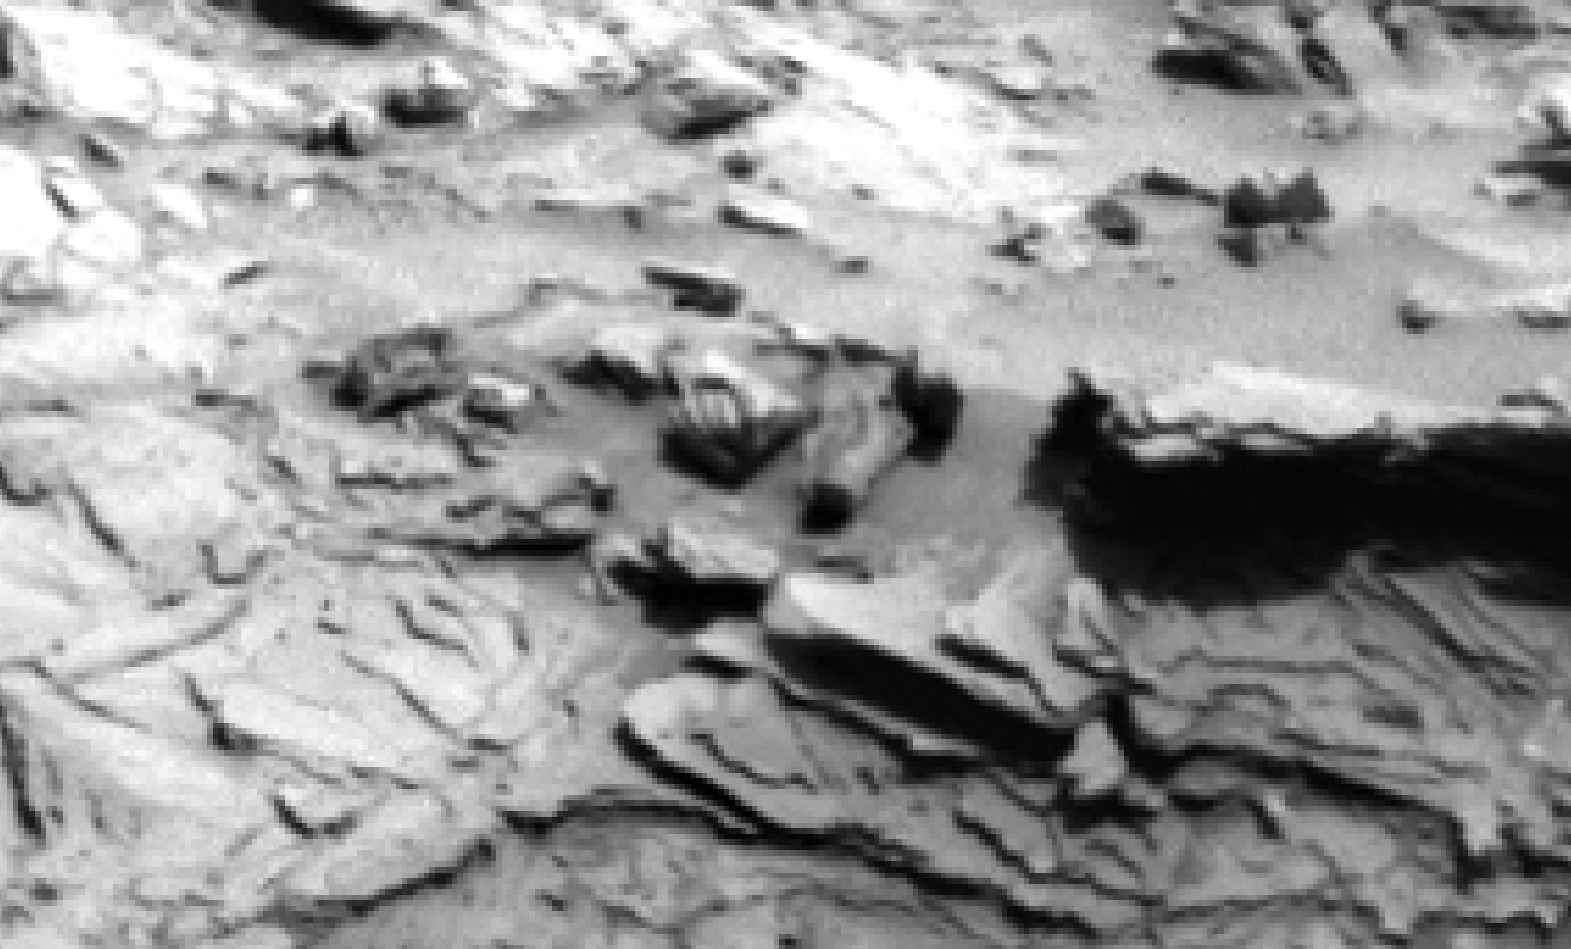 mars sol 1342 anomaly-artifacts 2 was life on mars